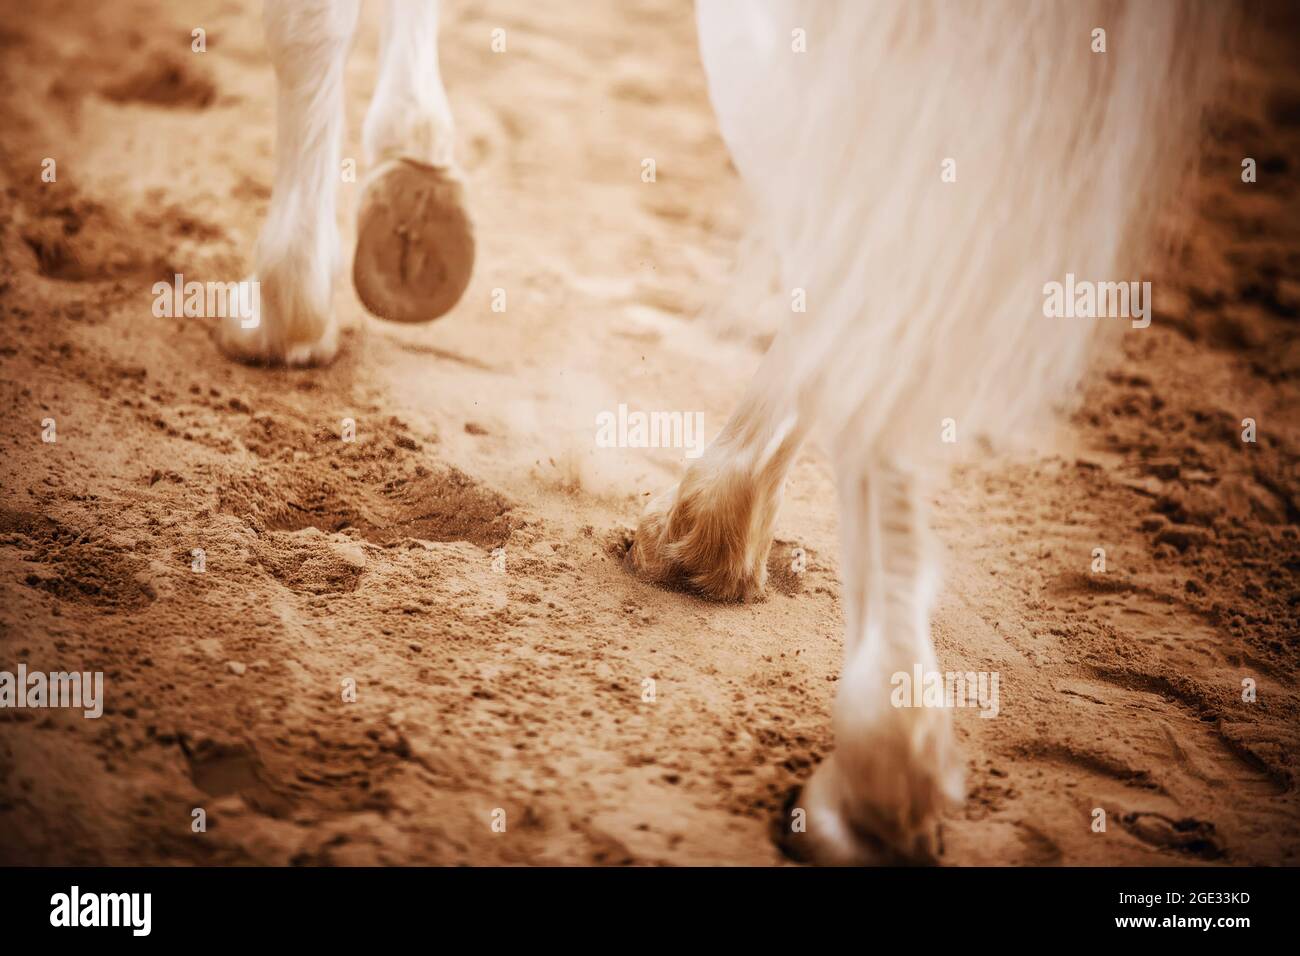 A rear view of the legs of a white horse with a long tail, which steps with its hooves on the sand in the arena. Equestrian sports and dressage. Stock Photo